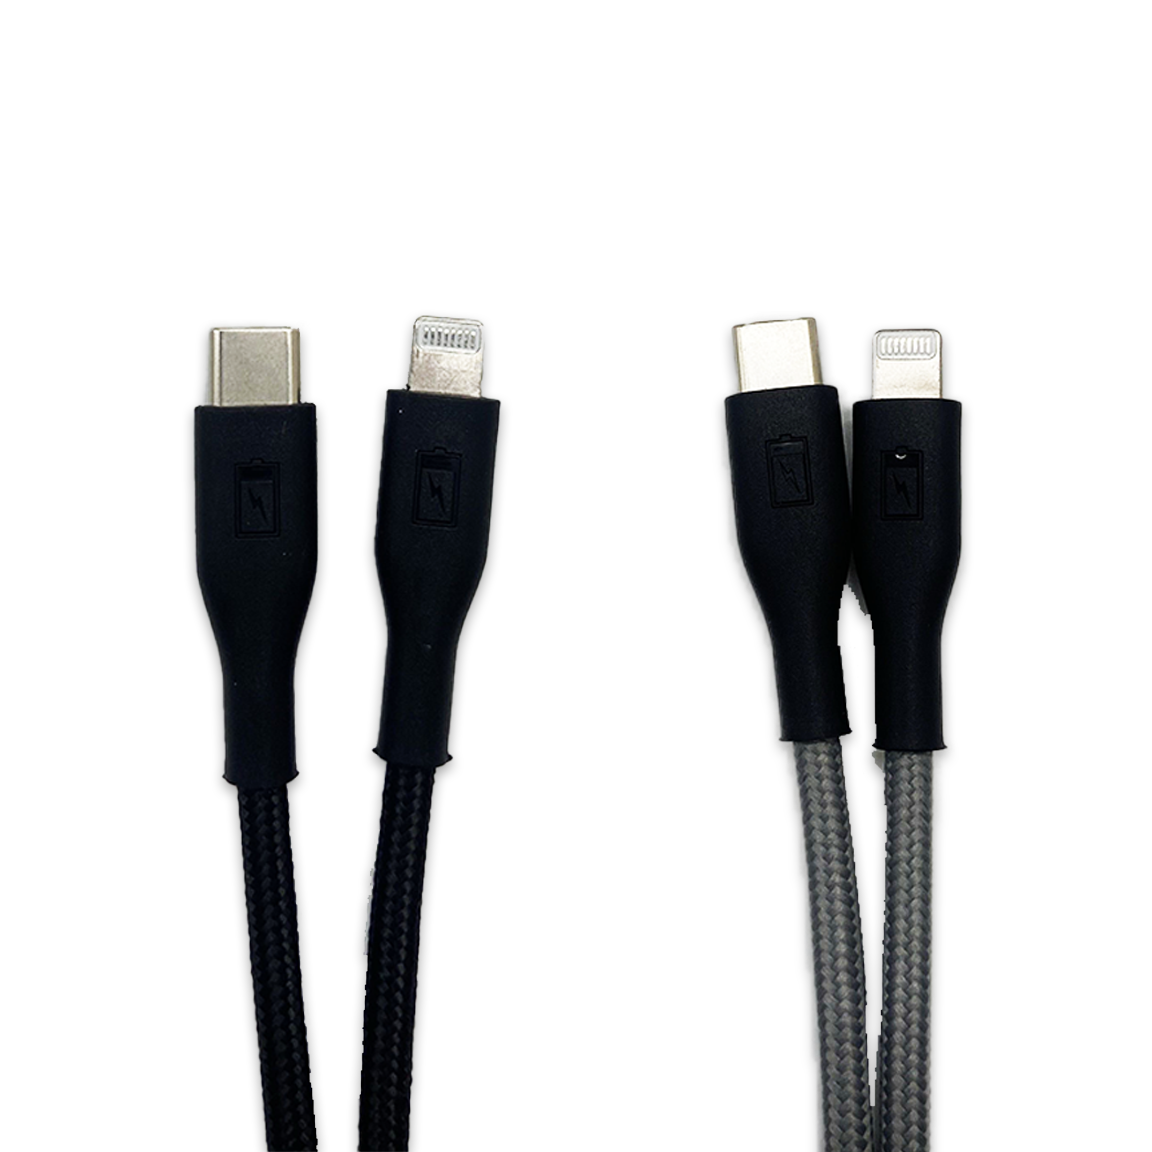 WHOLESALE 10FT LIGHTNING CABLE 6 PIECES PER PACK 24653